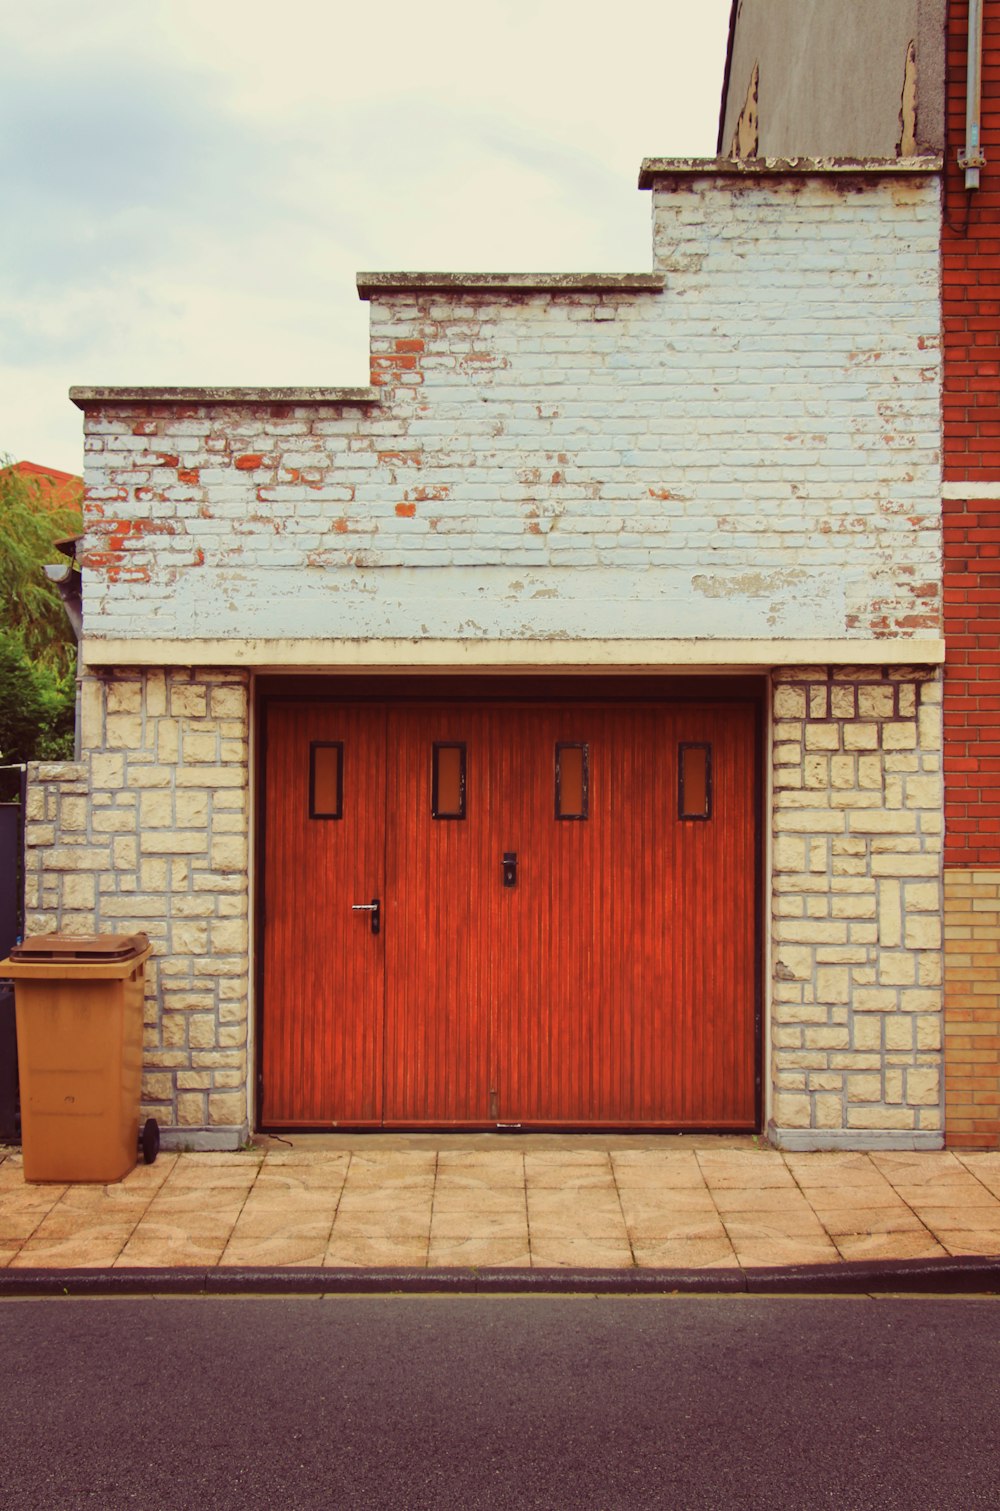 a brick building with a red door and a trash can